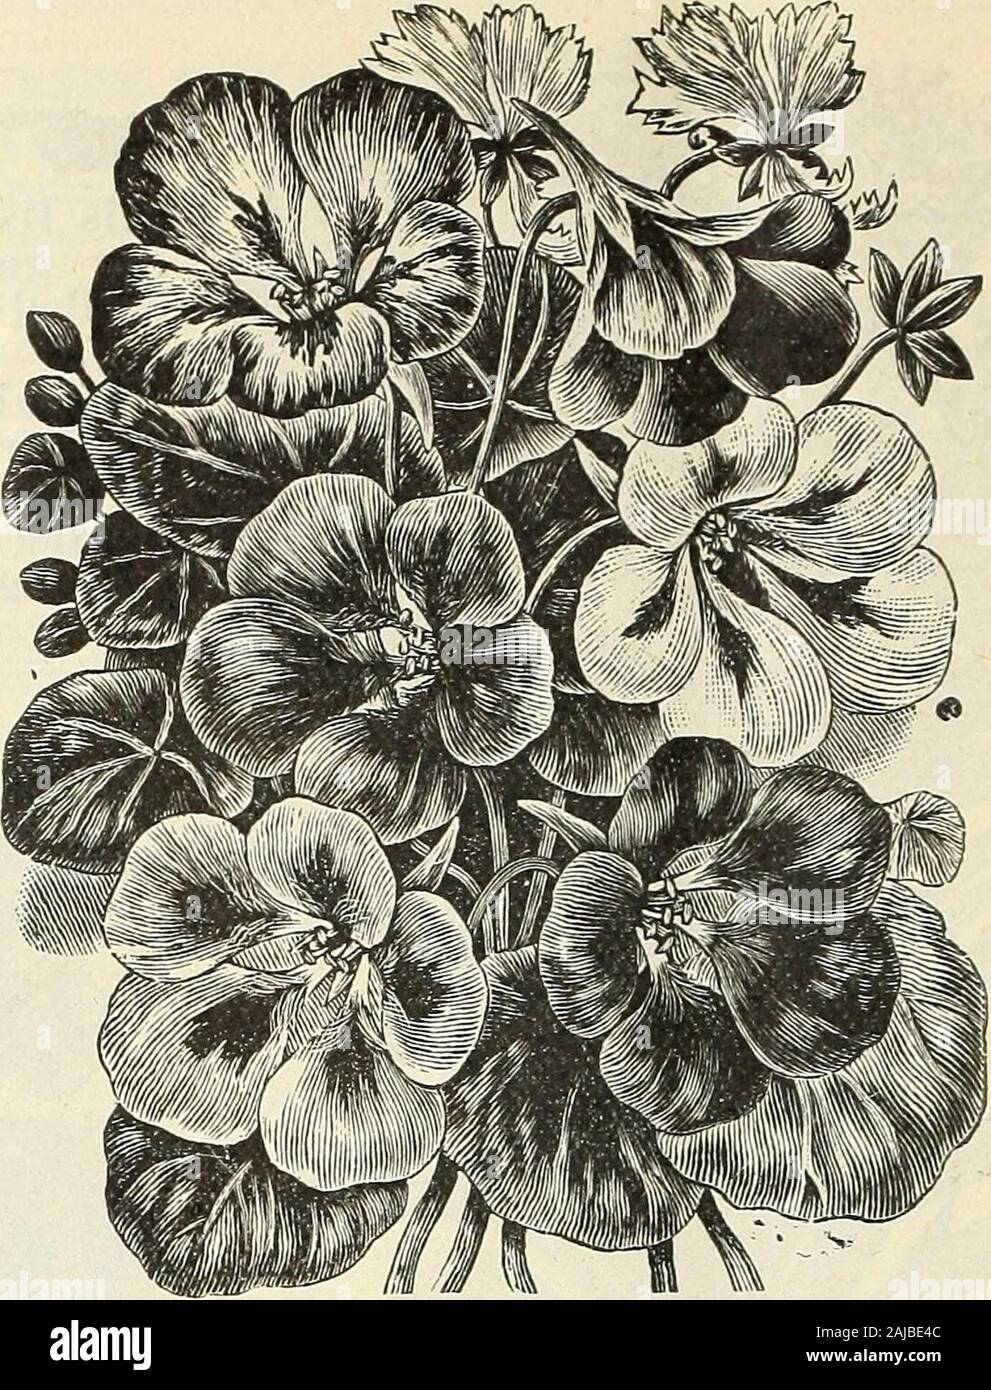 Barnard's wholesale florists' list of seeds bulbs sundries, etc : spring edition 1895 . MIGNONETTE MACHET. MIGNONETTE. Machet. Best French Strain Ameliorata. Red flowered Gabriele Large Flowering Golden Queen Miles Spiral Parsons White Victoria, new red Eloise Frances, new, for pots, per 100MIMOSA PUDICA—(Sensitive Plant.)..MIMULUS Moschatus. {Musk Plant.) oz. 50c Tigrinus. {Monkey Floicev.) MIRABILIS Jalapa. {Four Oclock.) MOMORDICA I Balsamina. {Balsam Apple.) Charantia. {Balsam Pear.) MORNING GLORY—(See Convolvulus.)MUSA ENSETE. {Abyssinian Banana.) Per 100 seeds, $1.50; per 10 seeds MYOSOT Stock Photo